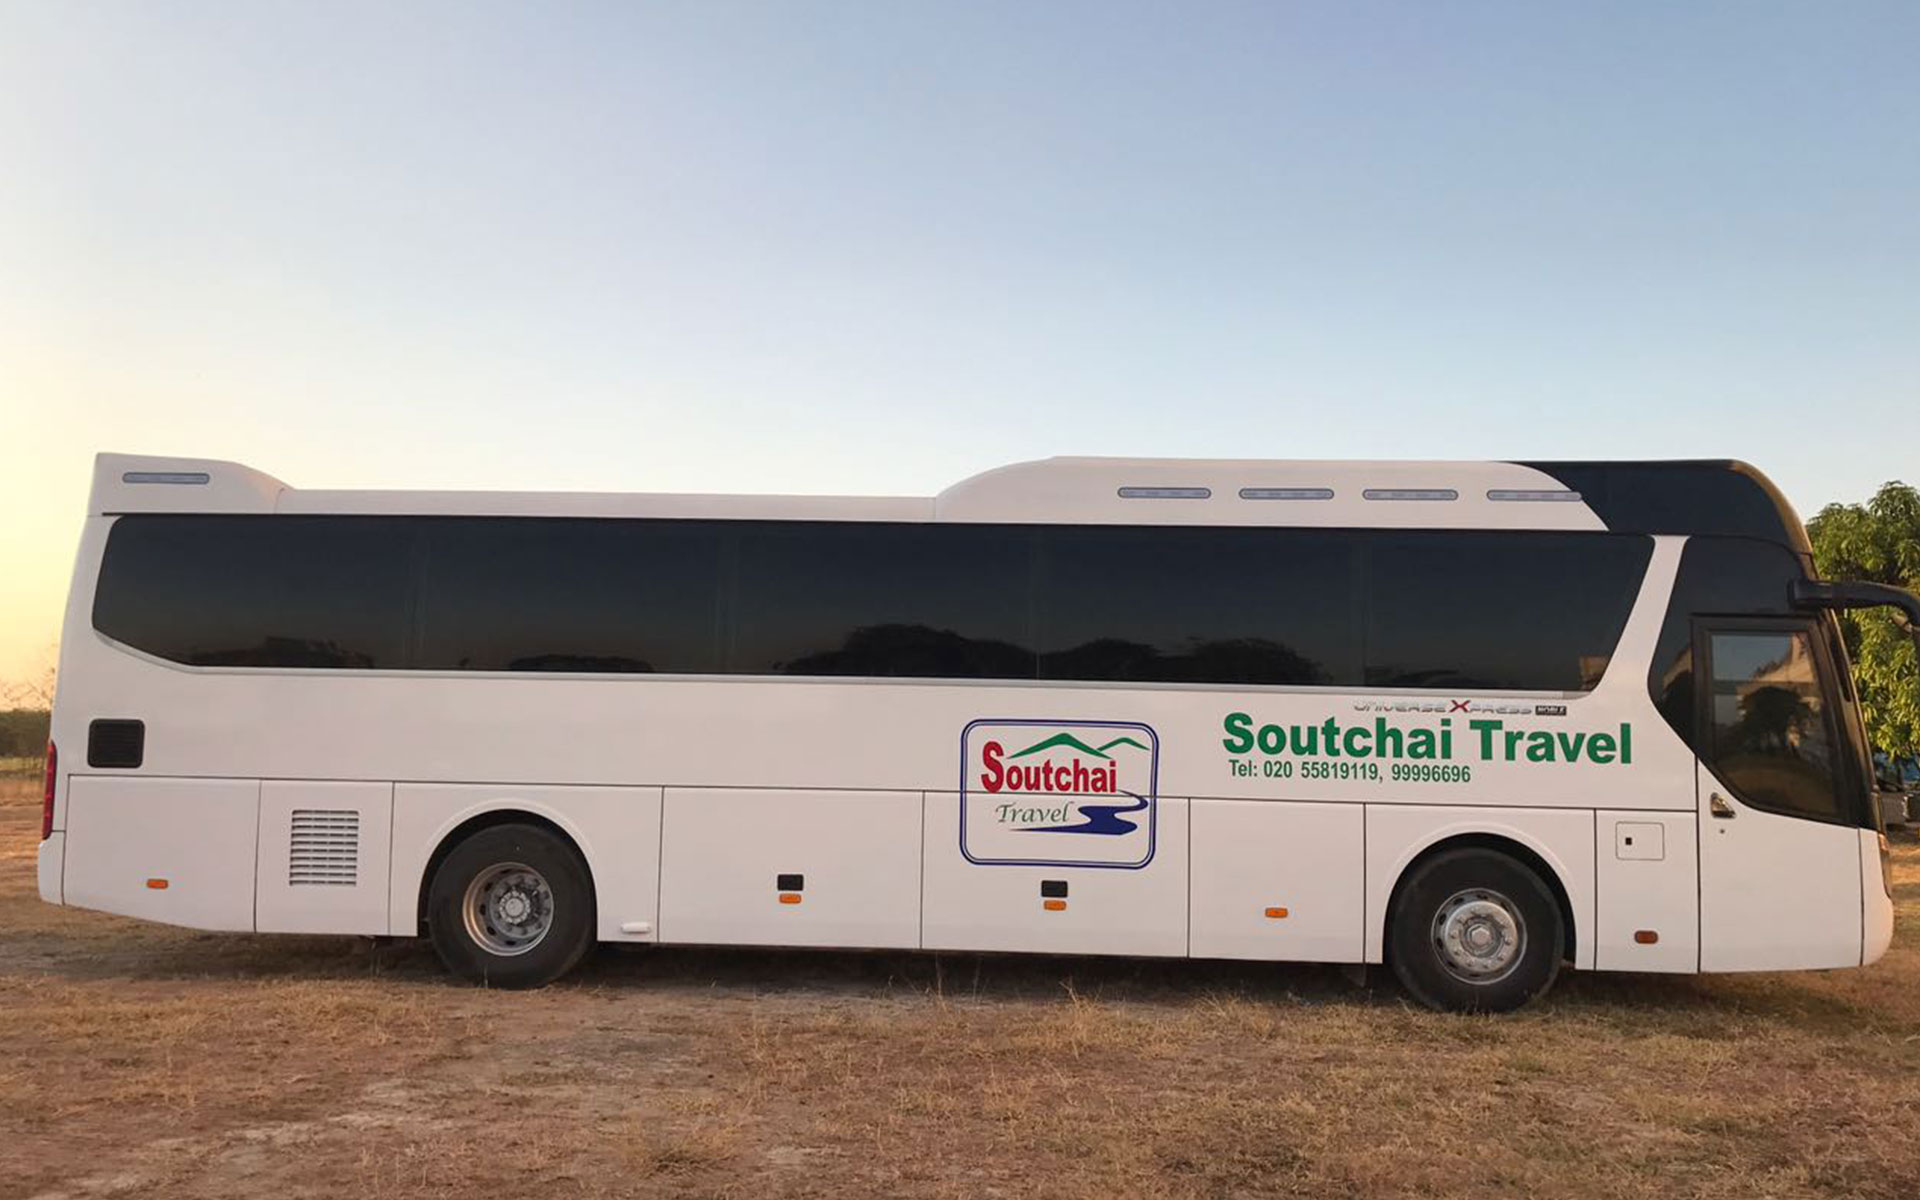 Soutchai Travel is bus company that provides service from Luang Prabang to Vang Vieng.